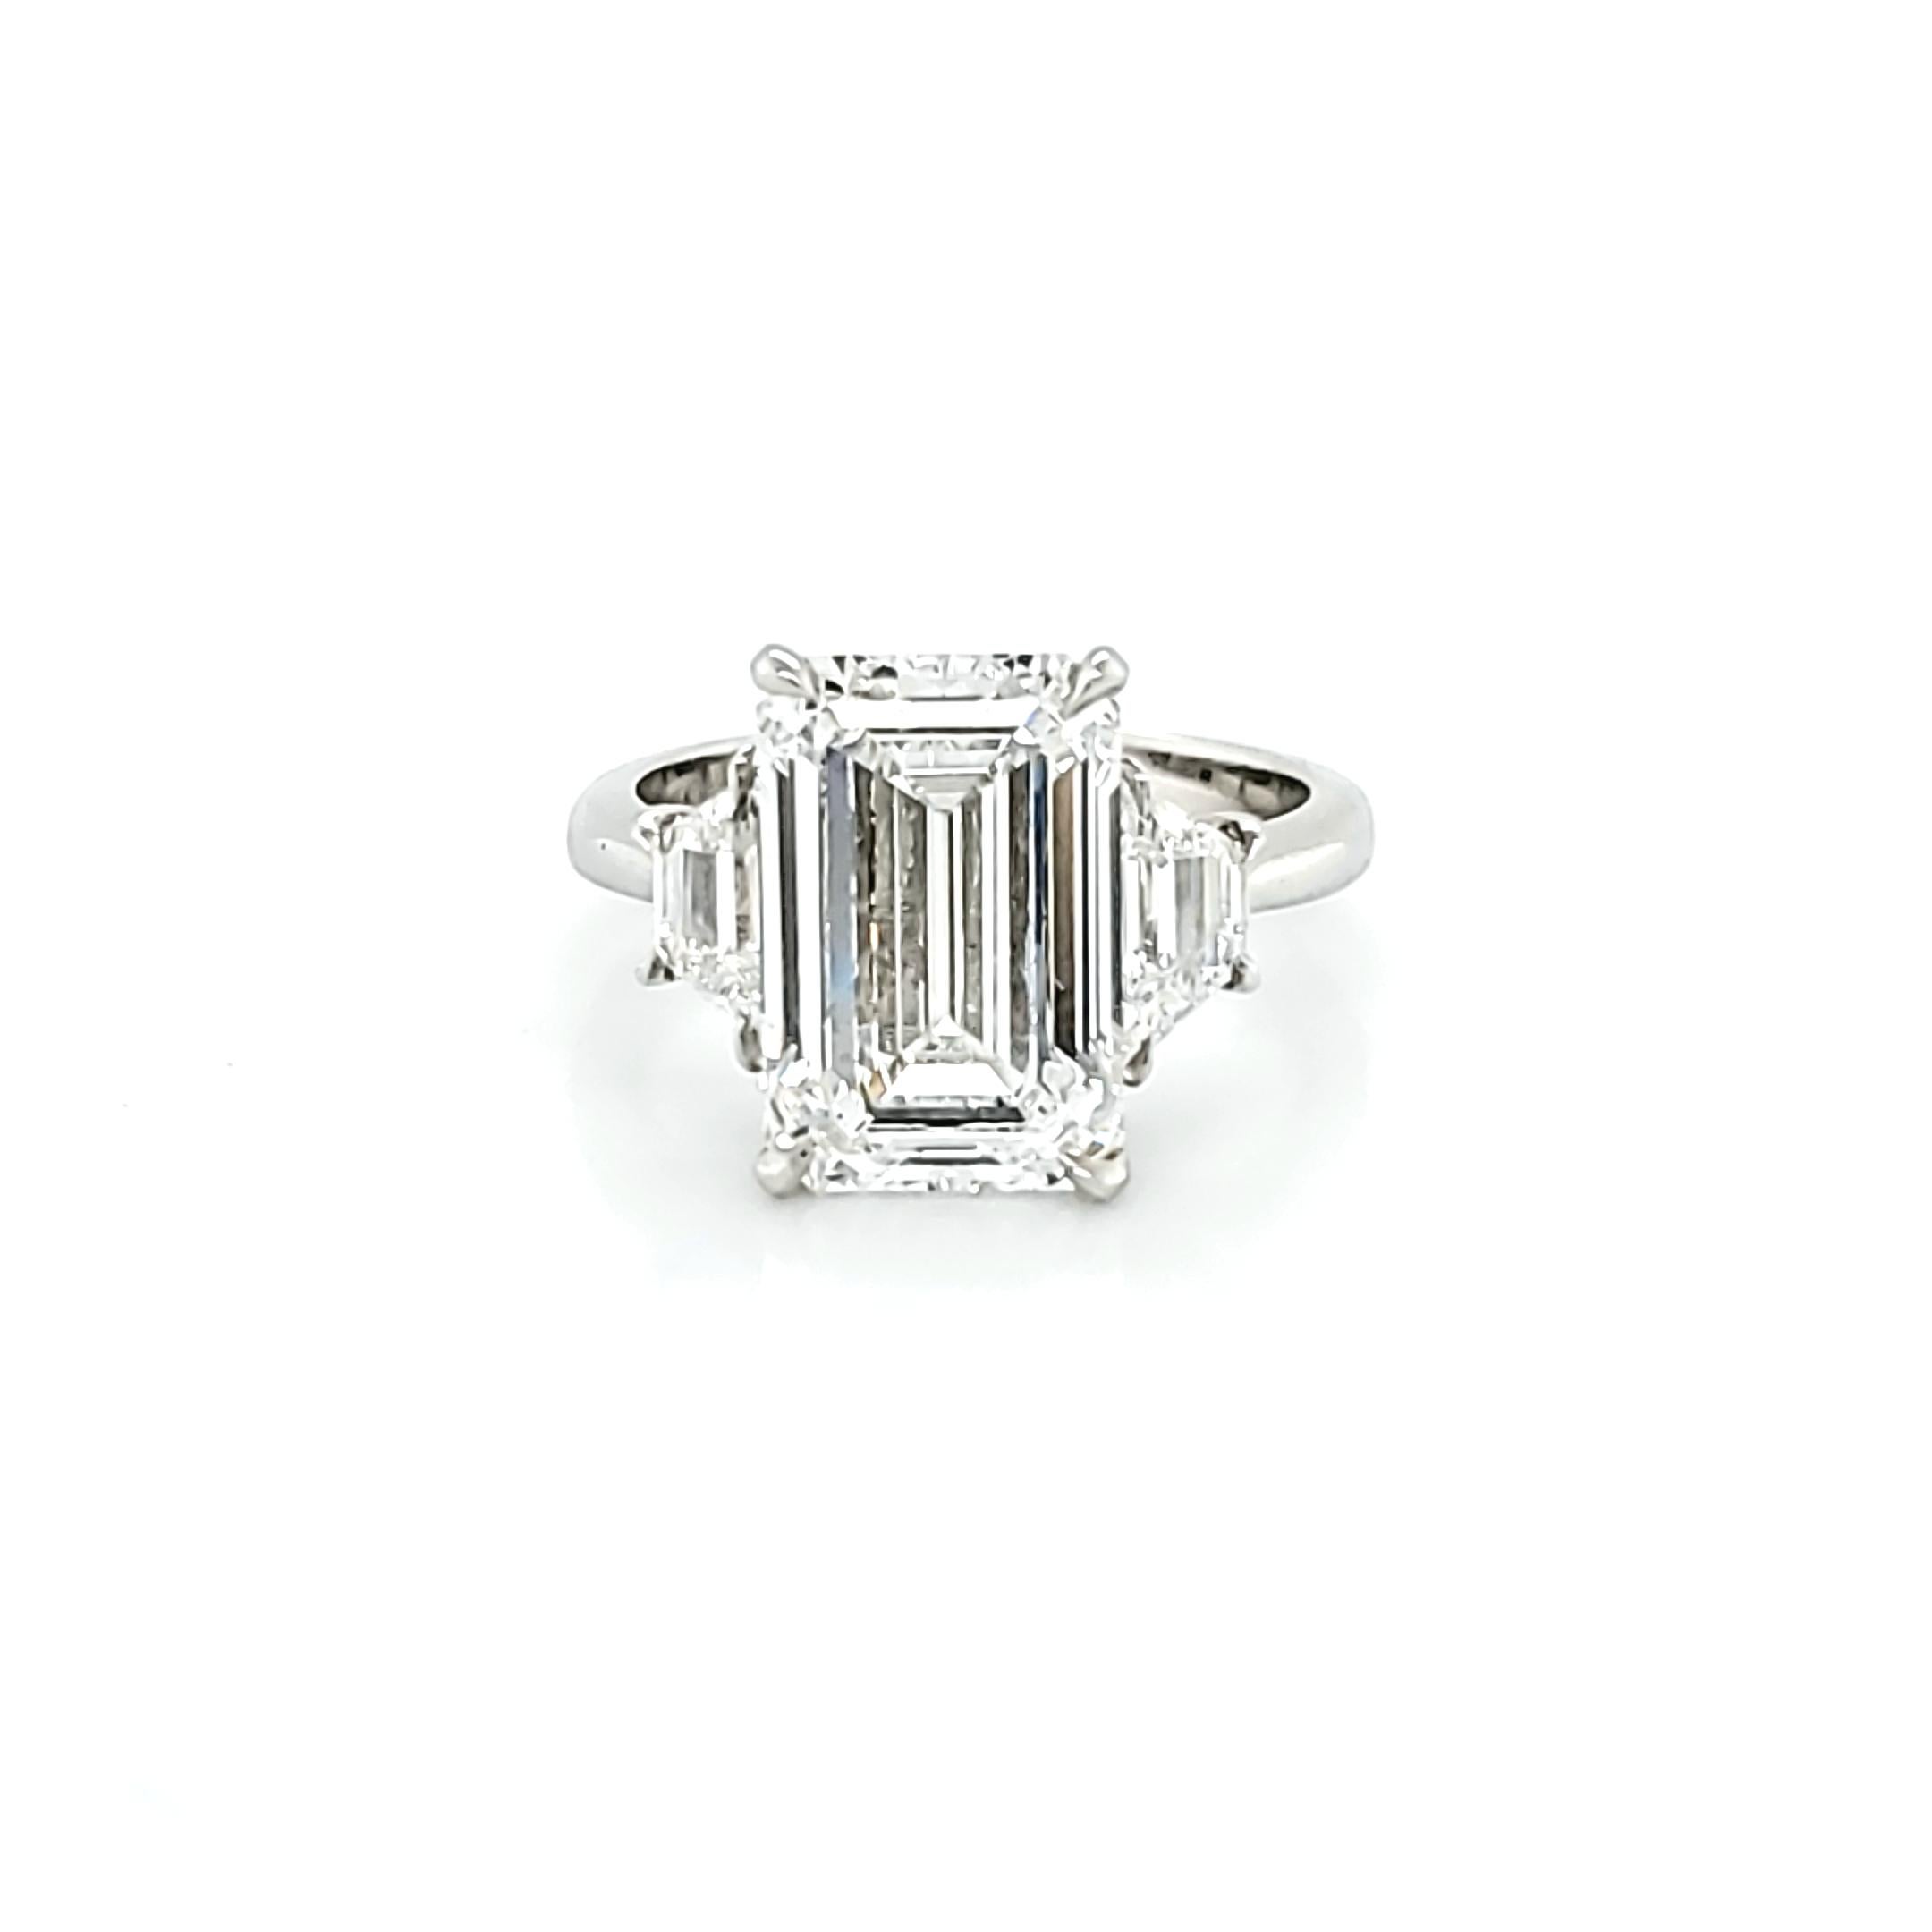 Center stone is a 5.01 carat E color internally Flawless Clarity. Set in a handmade platinum setting with 2 trapezoid shaped diamonds weighing 0.73 carats total and are of similar color/clarity to the Emerald Cut. 1.50 ratio makes this emerald cut a